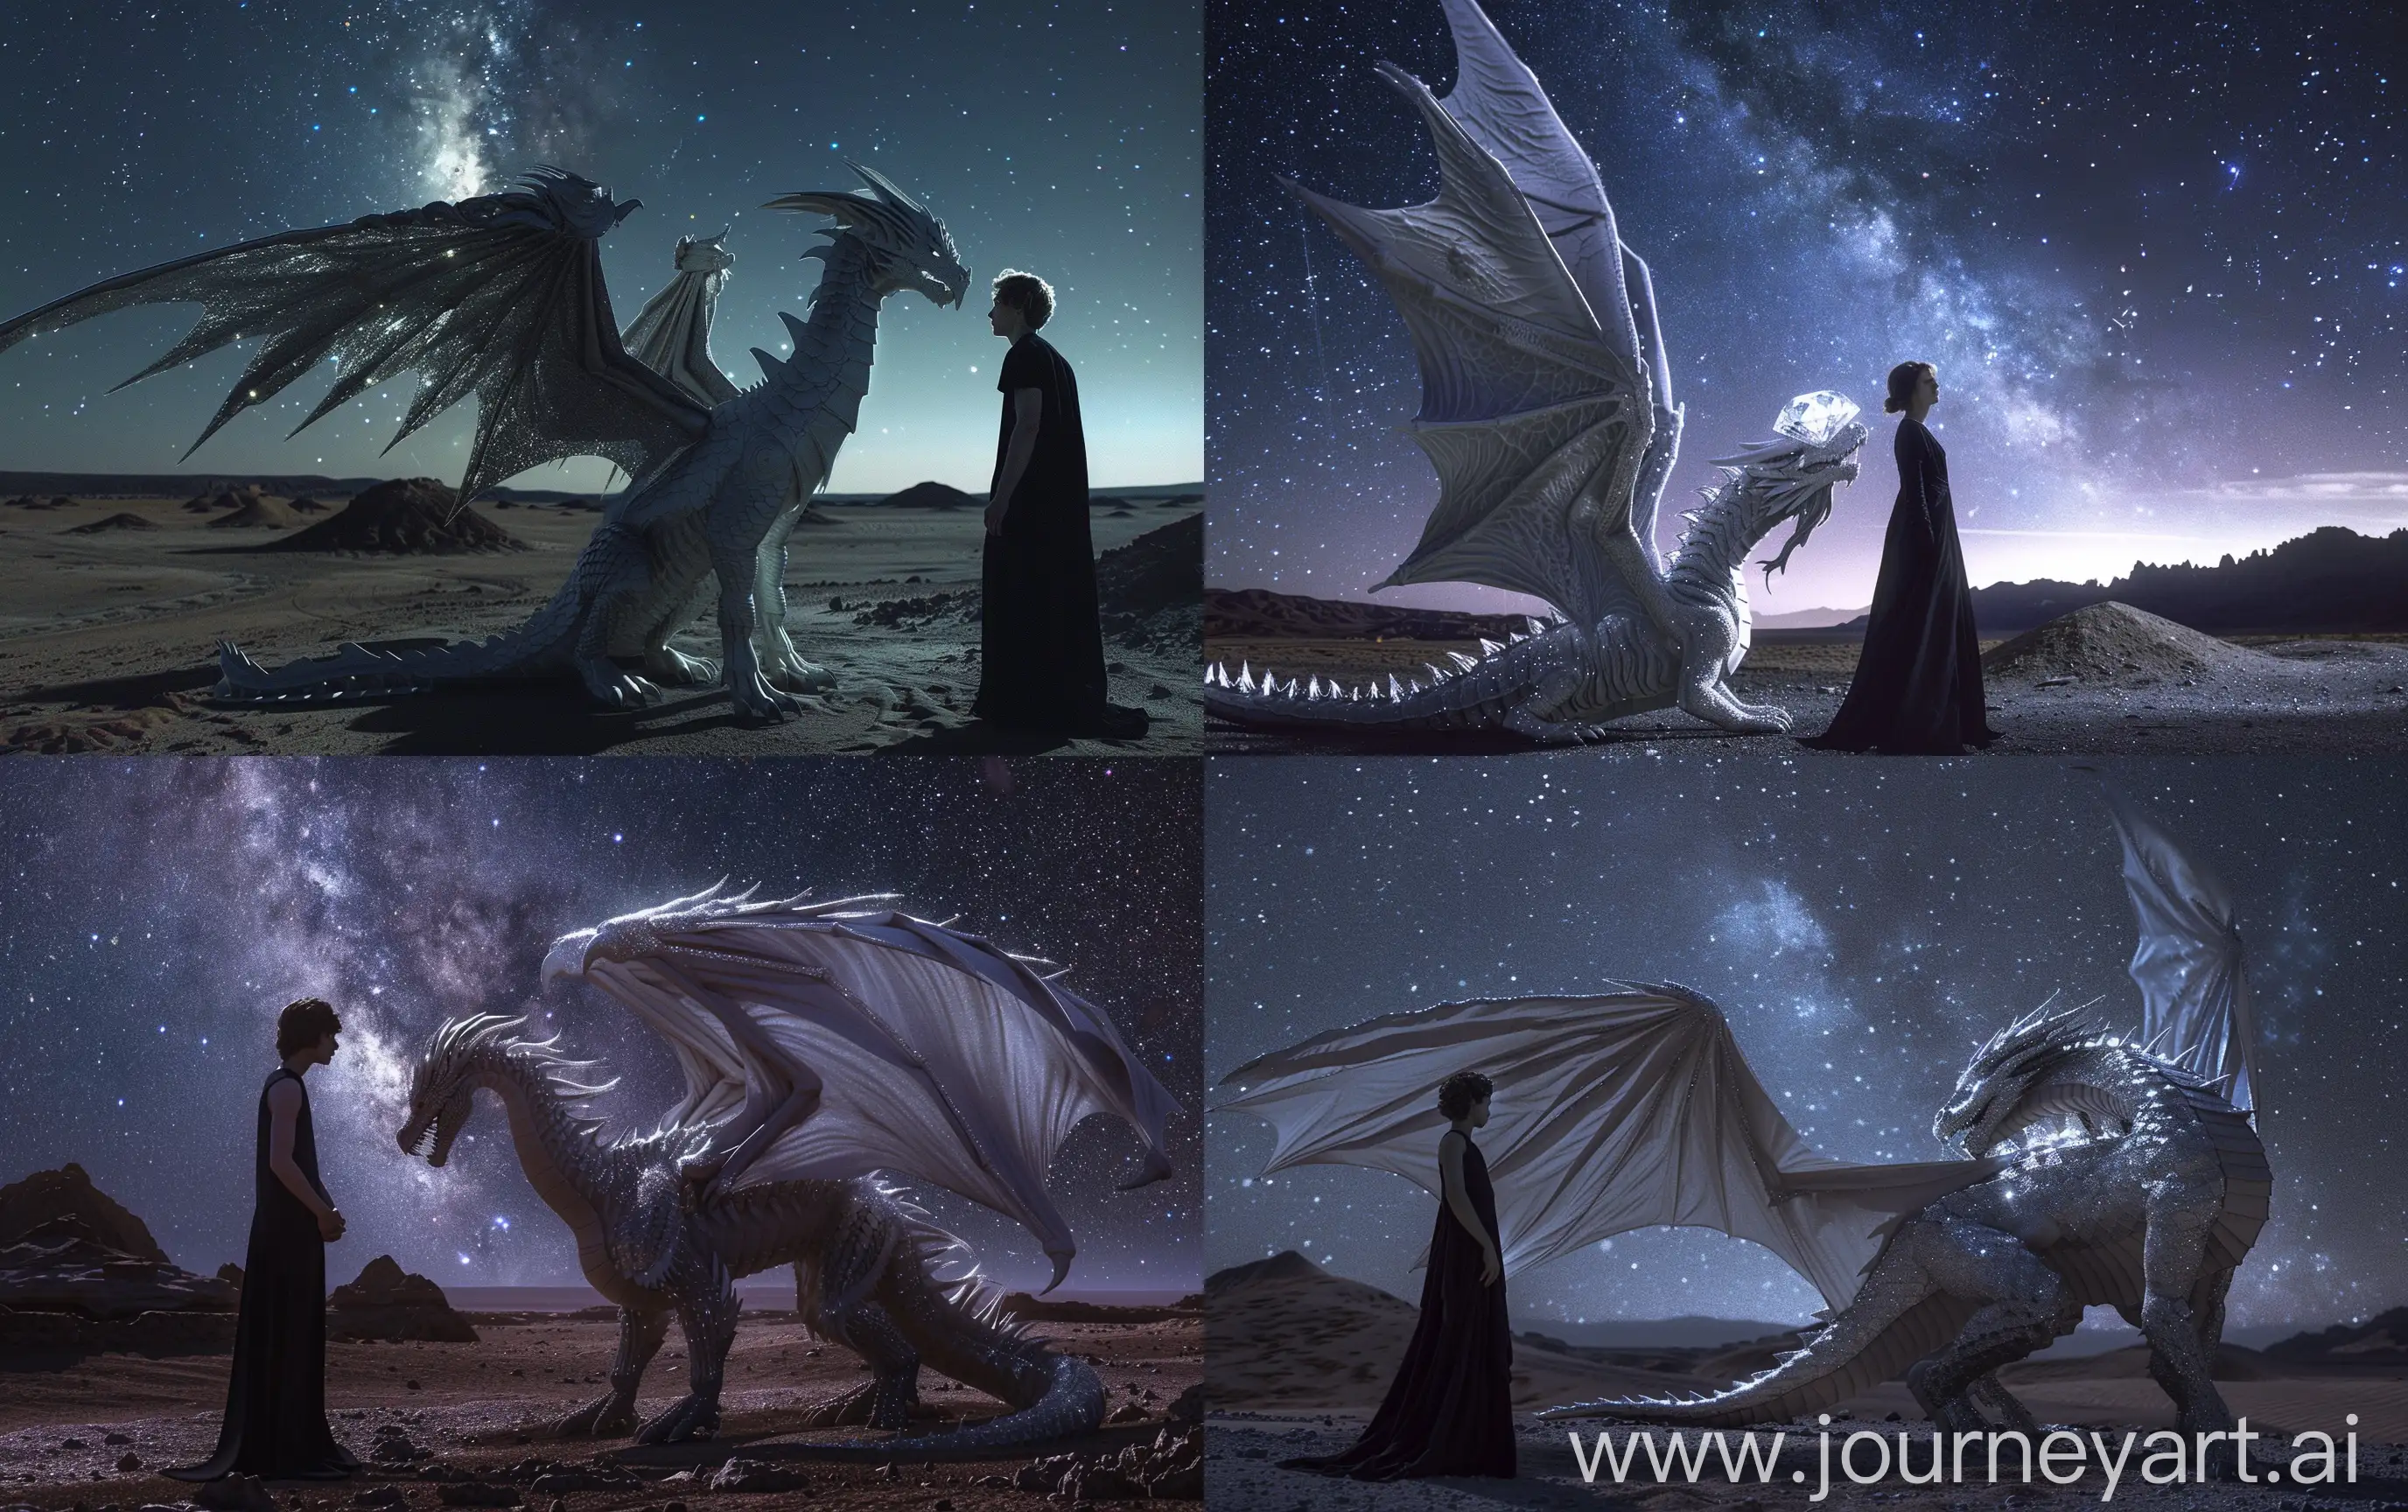 The huge winged diamond dragon stands on the ground, young man in long black dress looks at the dragon, the night dark desert with small hills, a deep space with bright milky way in the sky, realistic, Kodak 35mm shot --ar 16:10